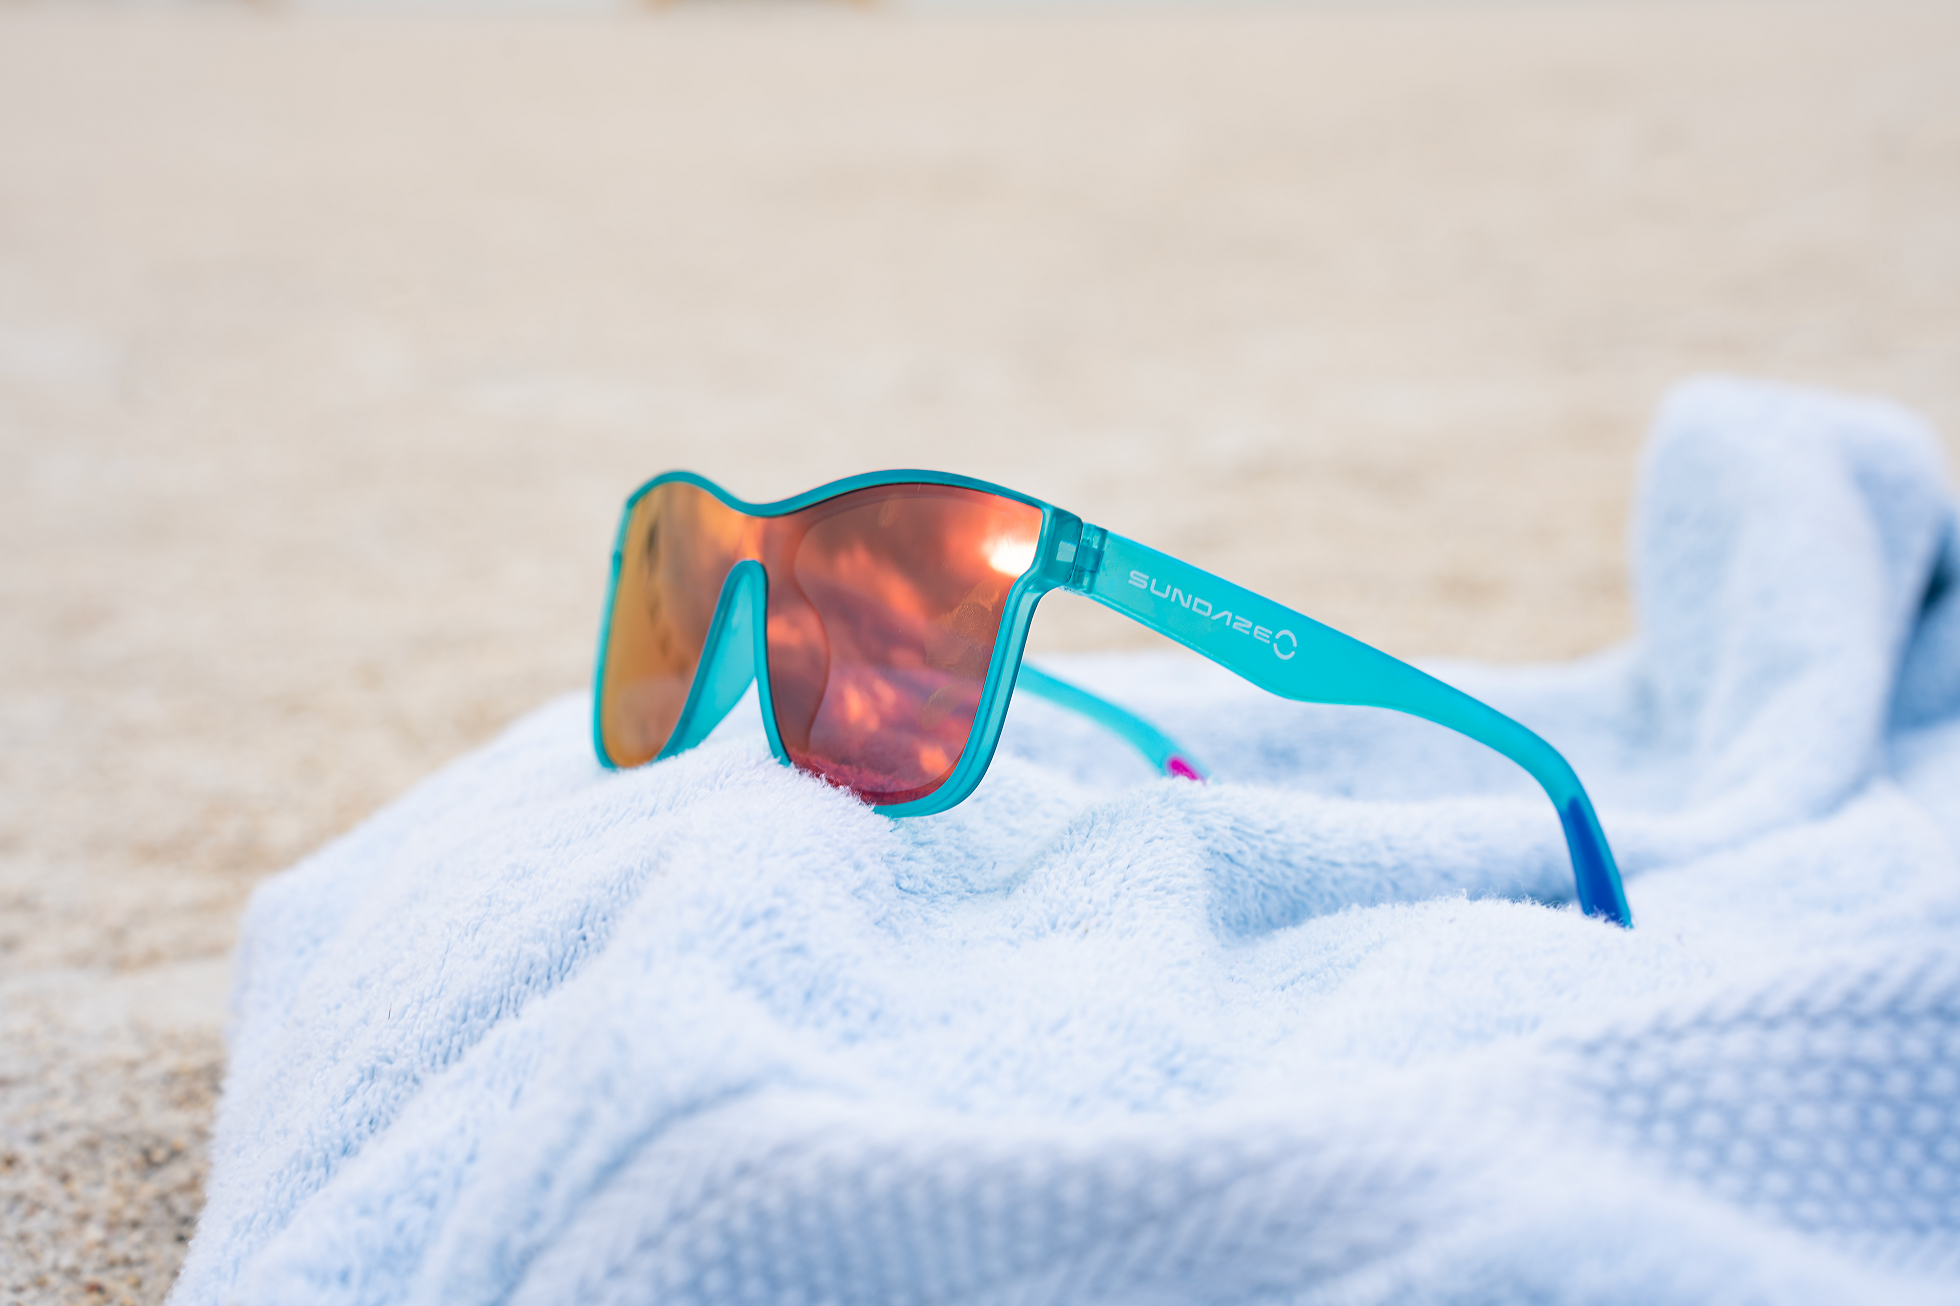 Sundaze Rays: Polarized and Premium Sunglasses at Incredible Prices